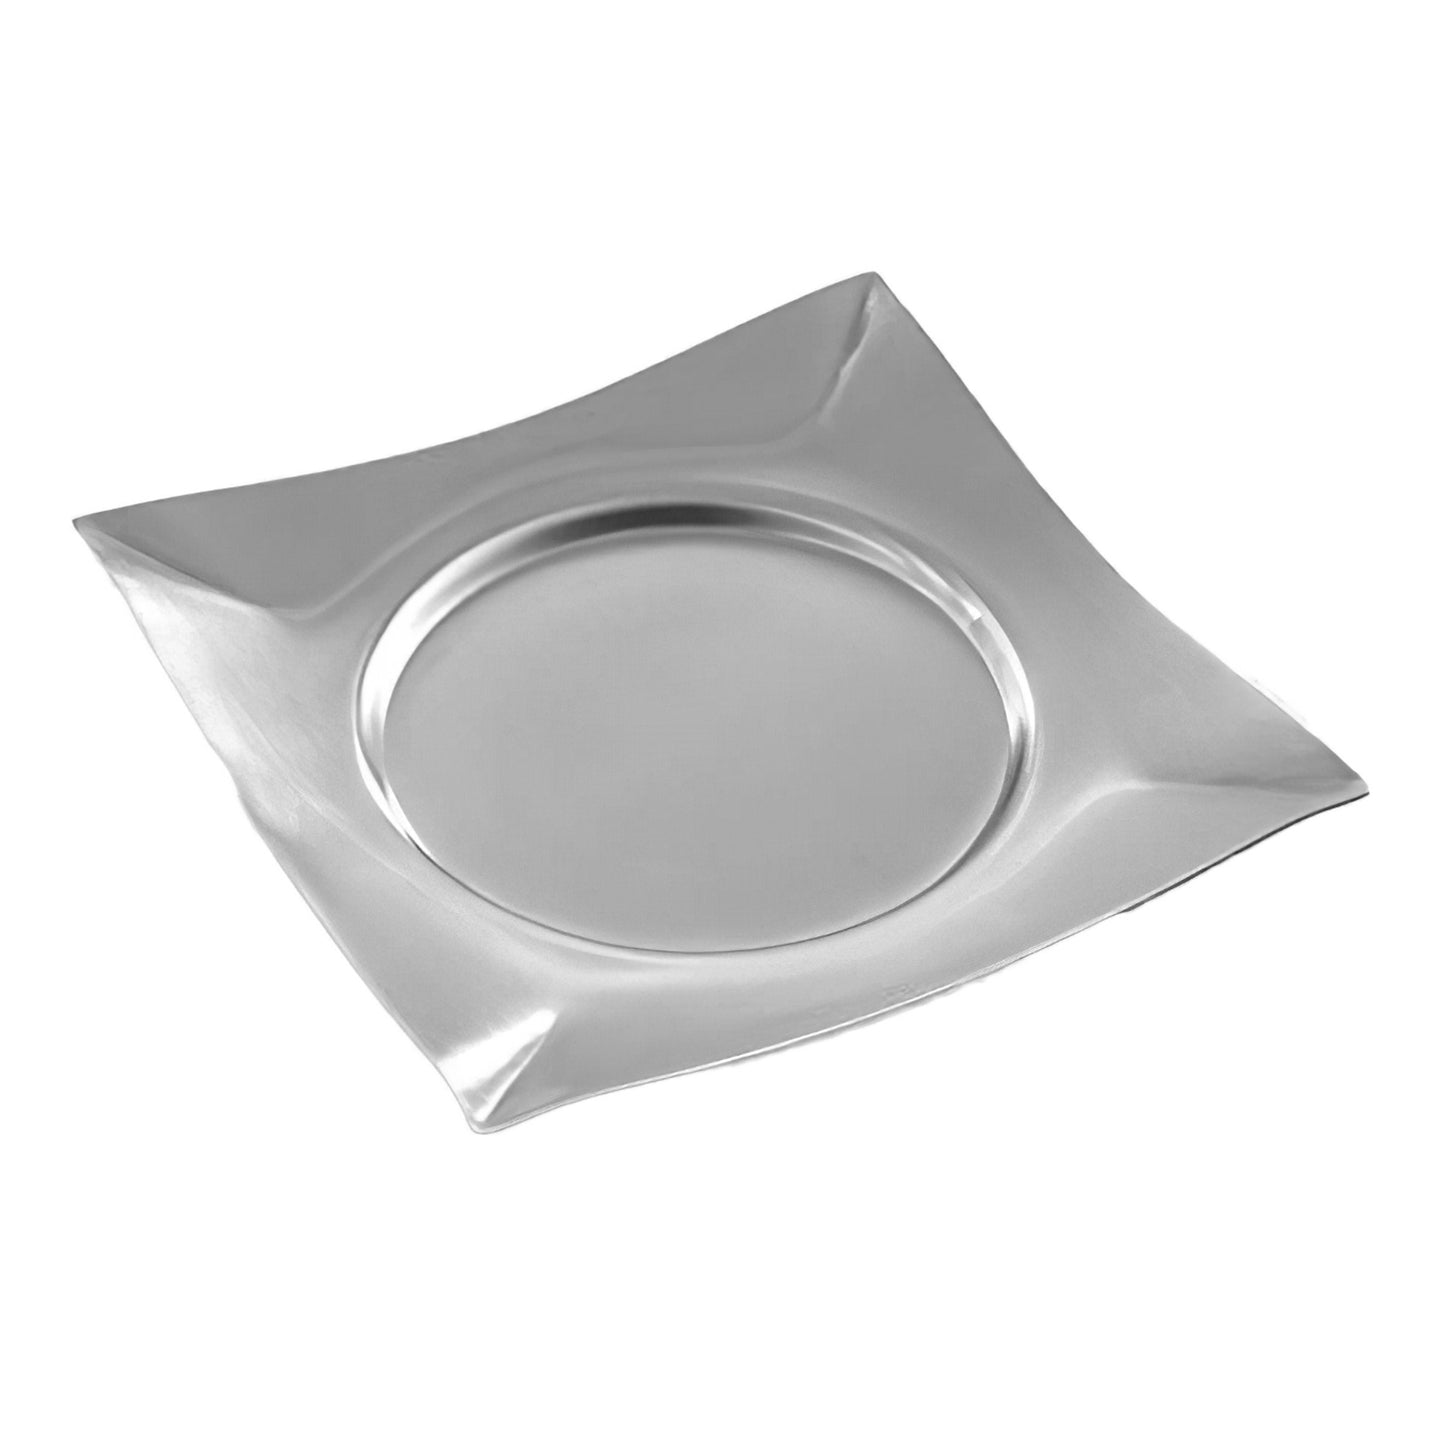 5" Stainless Steel Coaster / Spoon Rest, 3.75" Recess